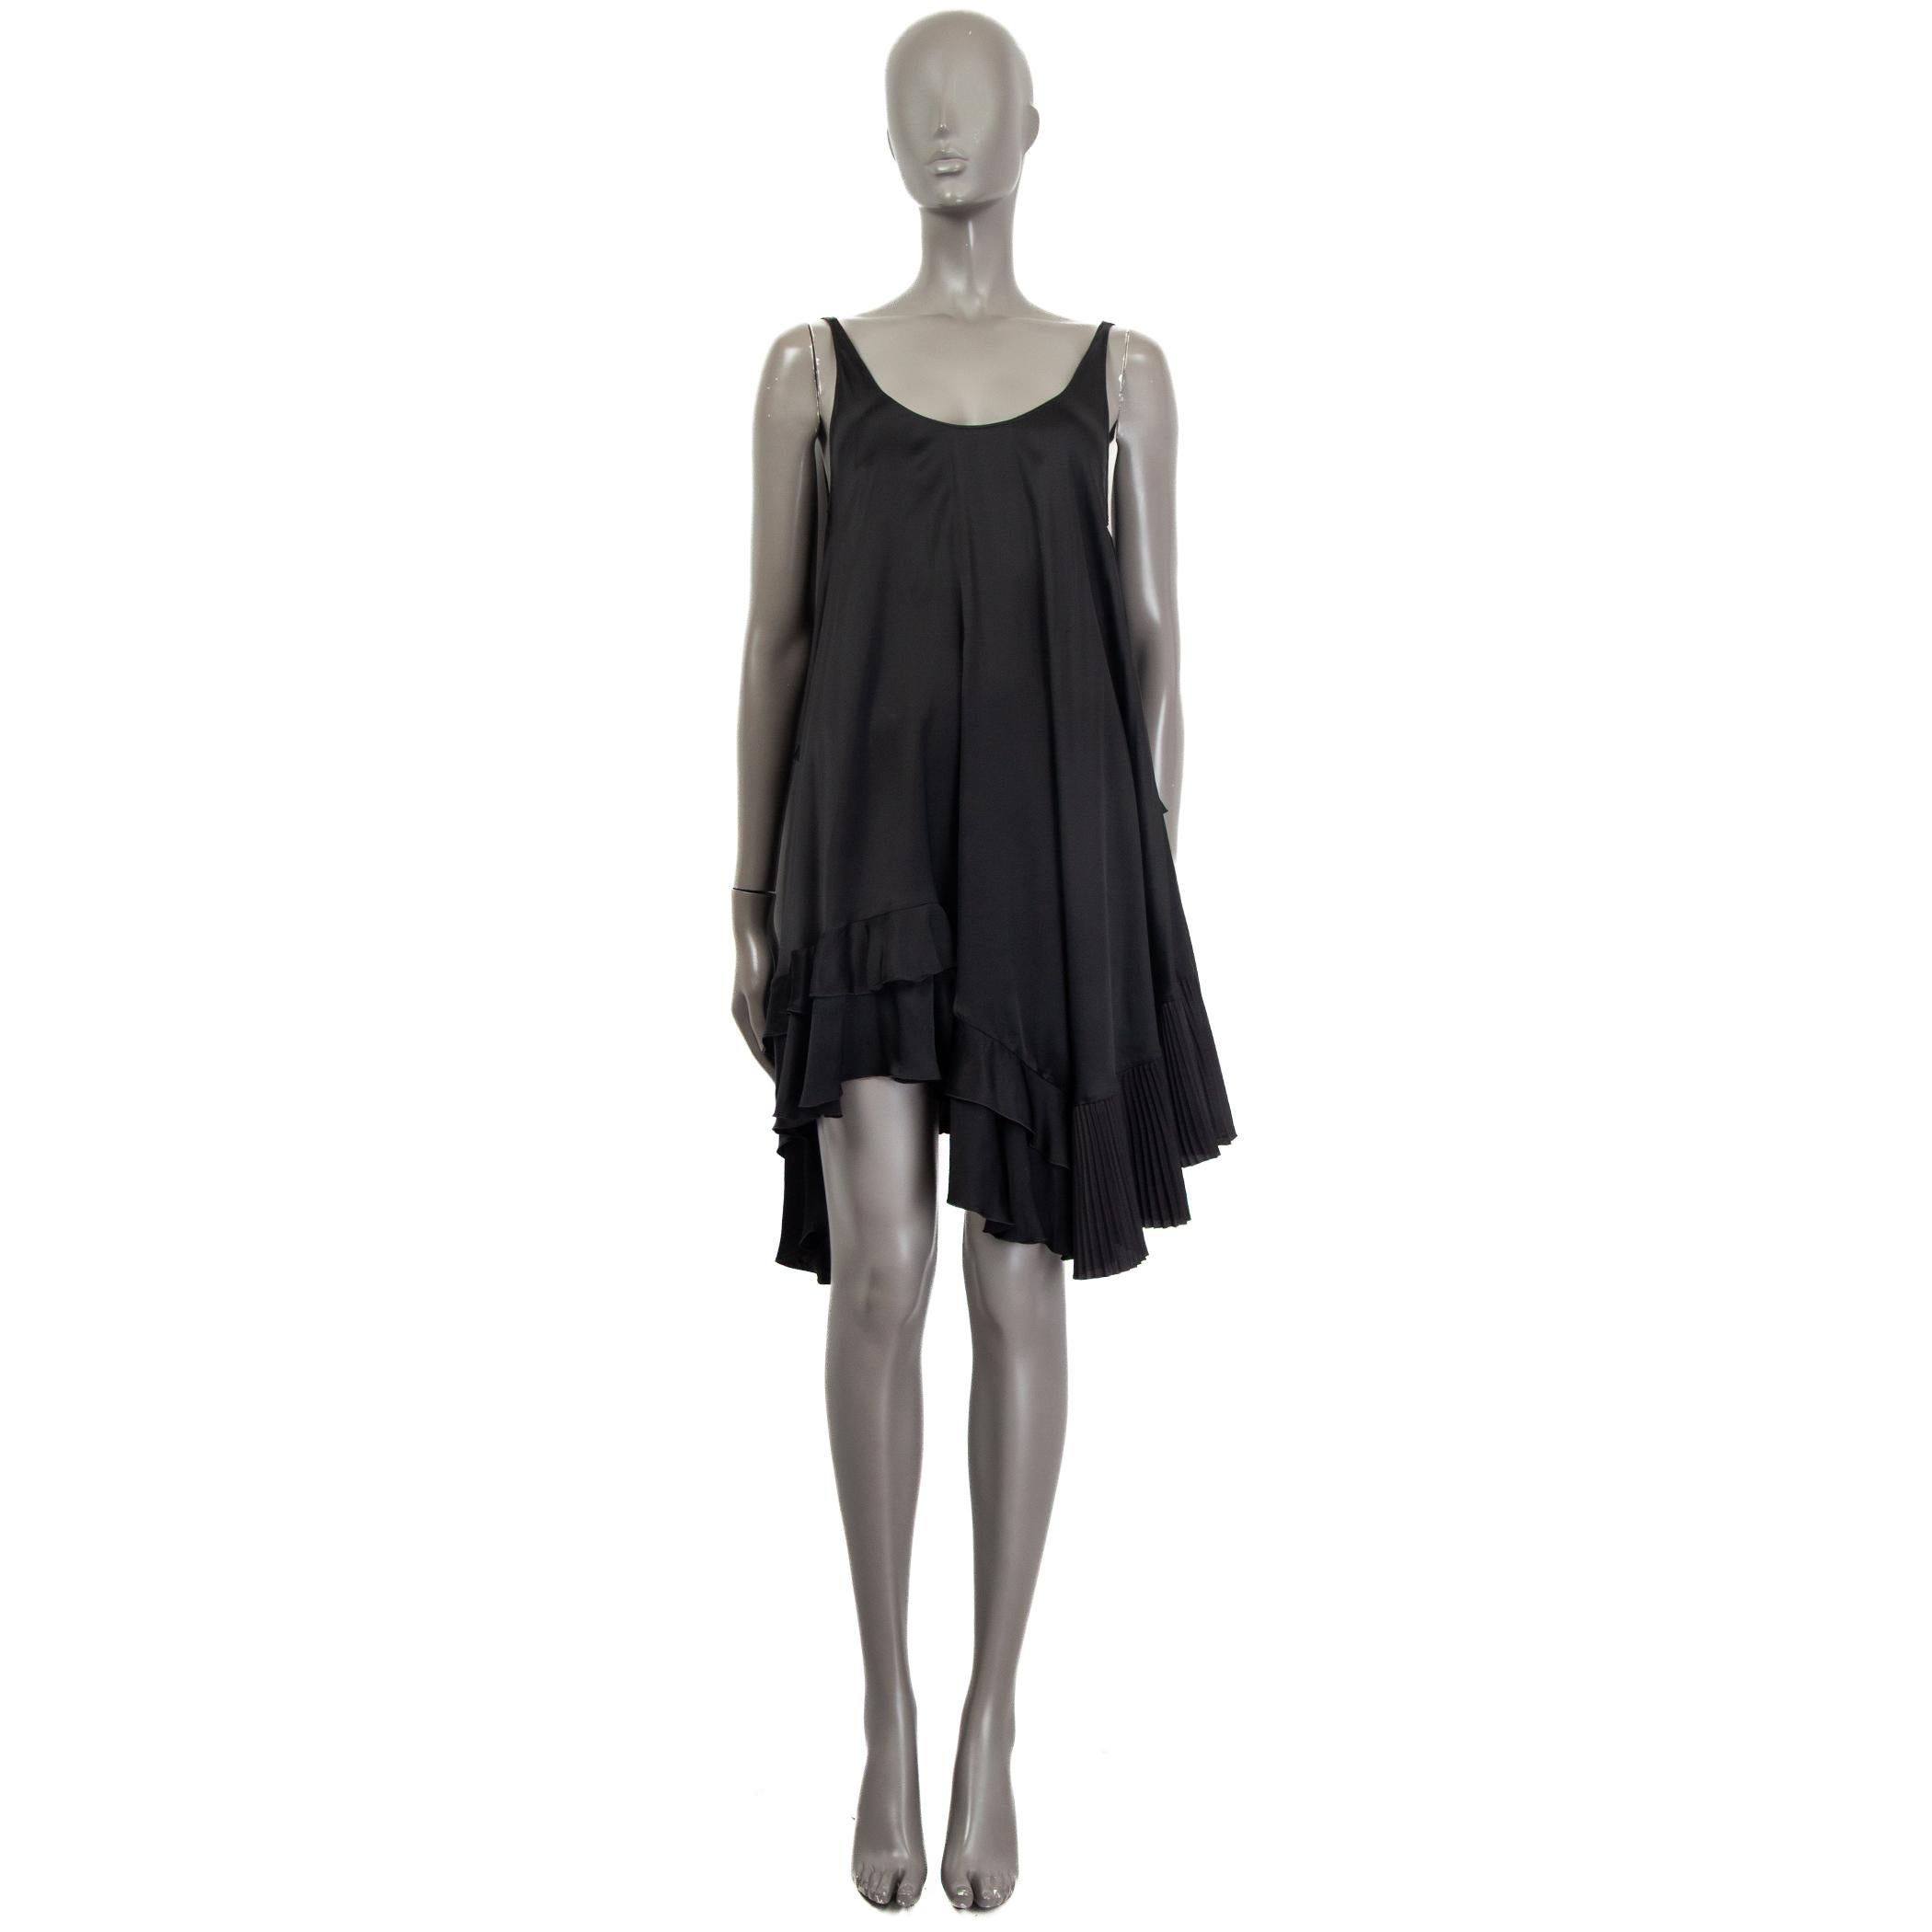 100% authentic Stella McCartney sleeveless mini dress in black rayon (79%) and silk (21%). Features an asymmetrical silhouette, loose fit and accordion pleated hem. Unlined. Shows some faint stains overall in excellent condition.

Measurements
Tag